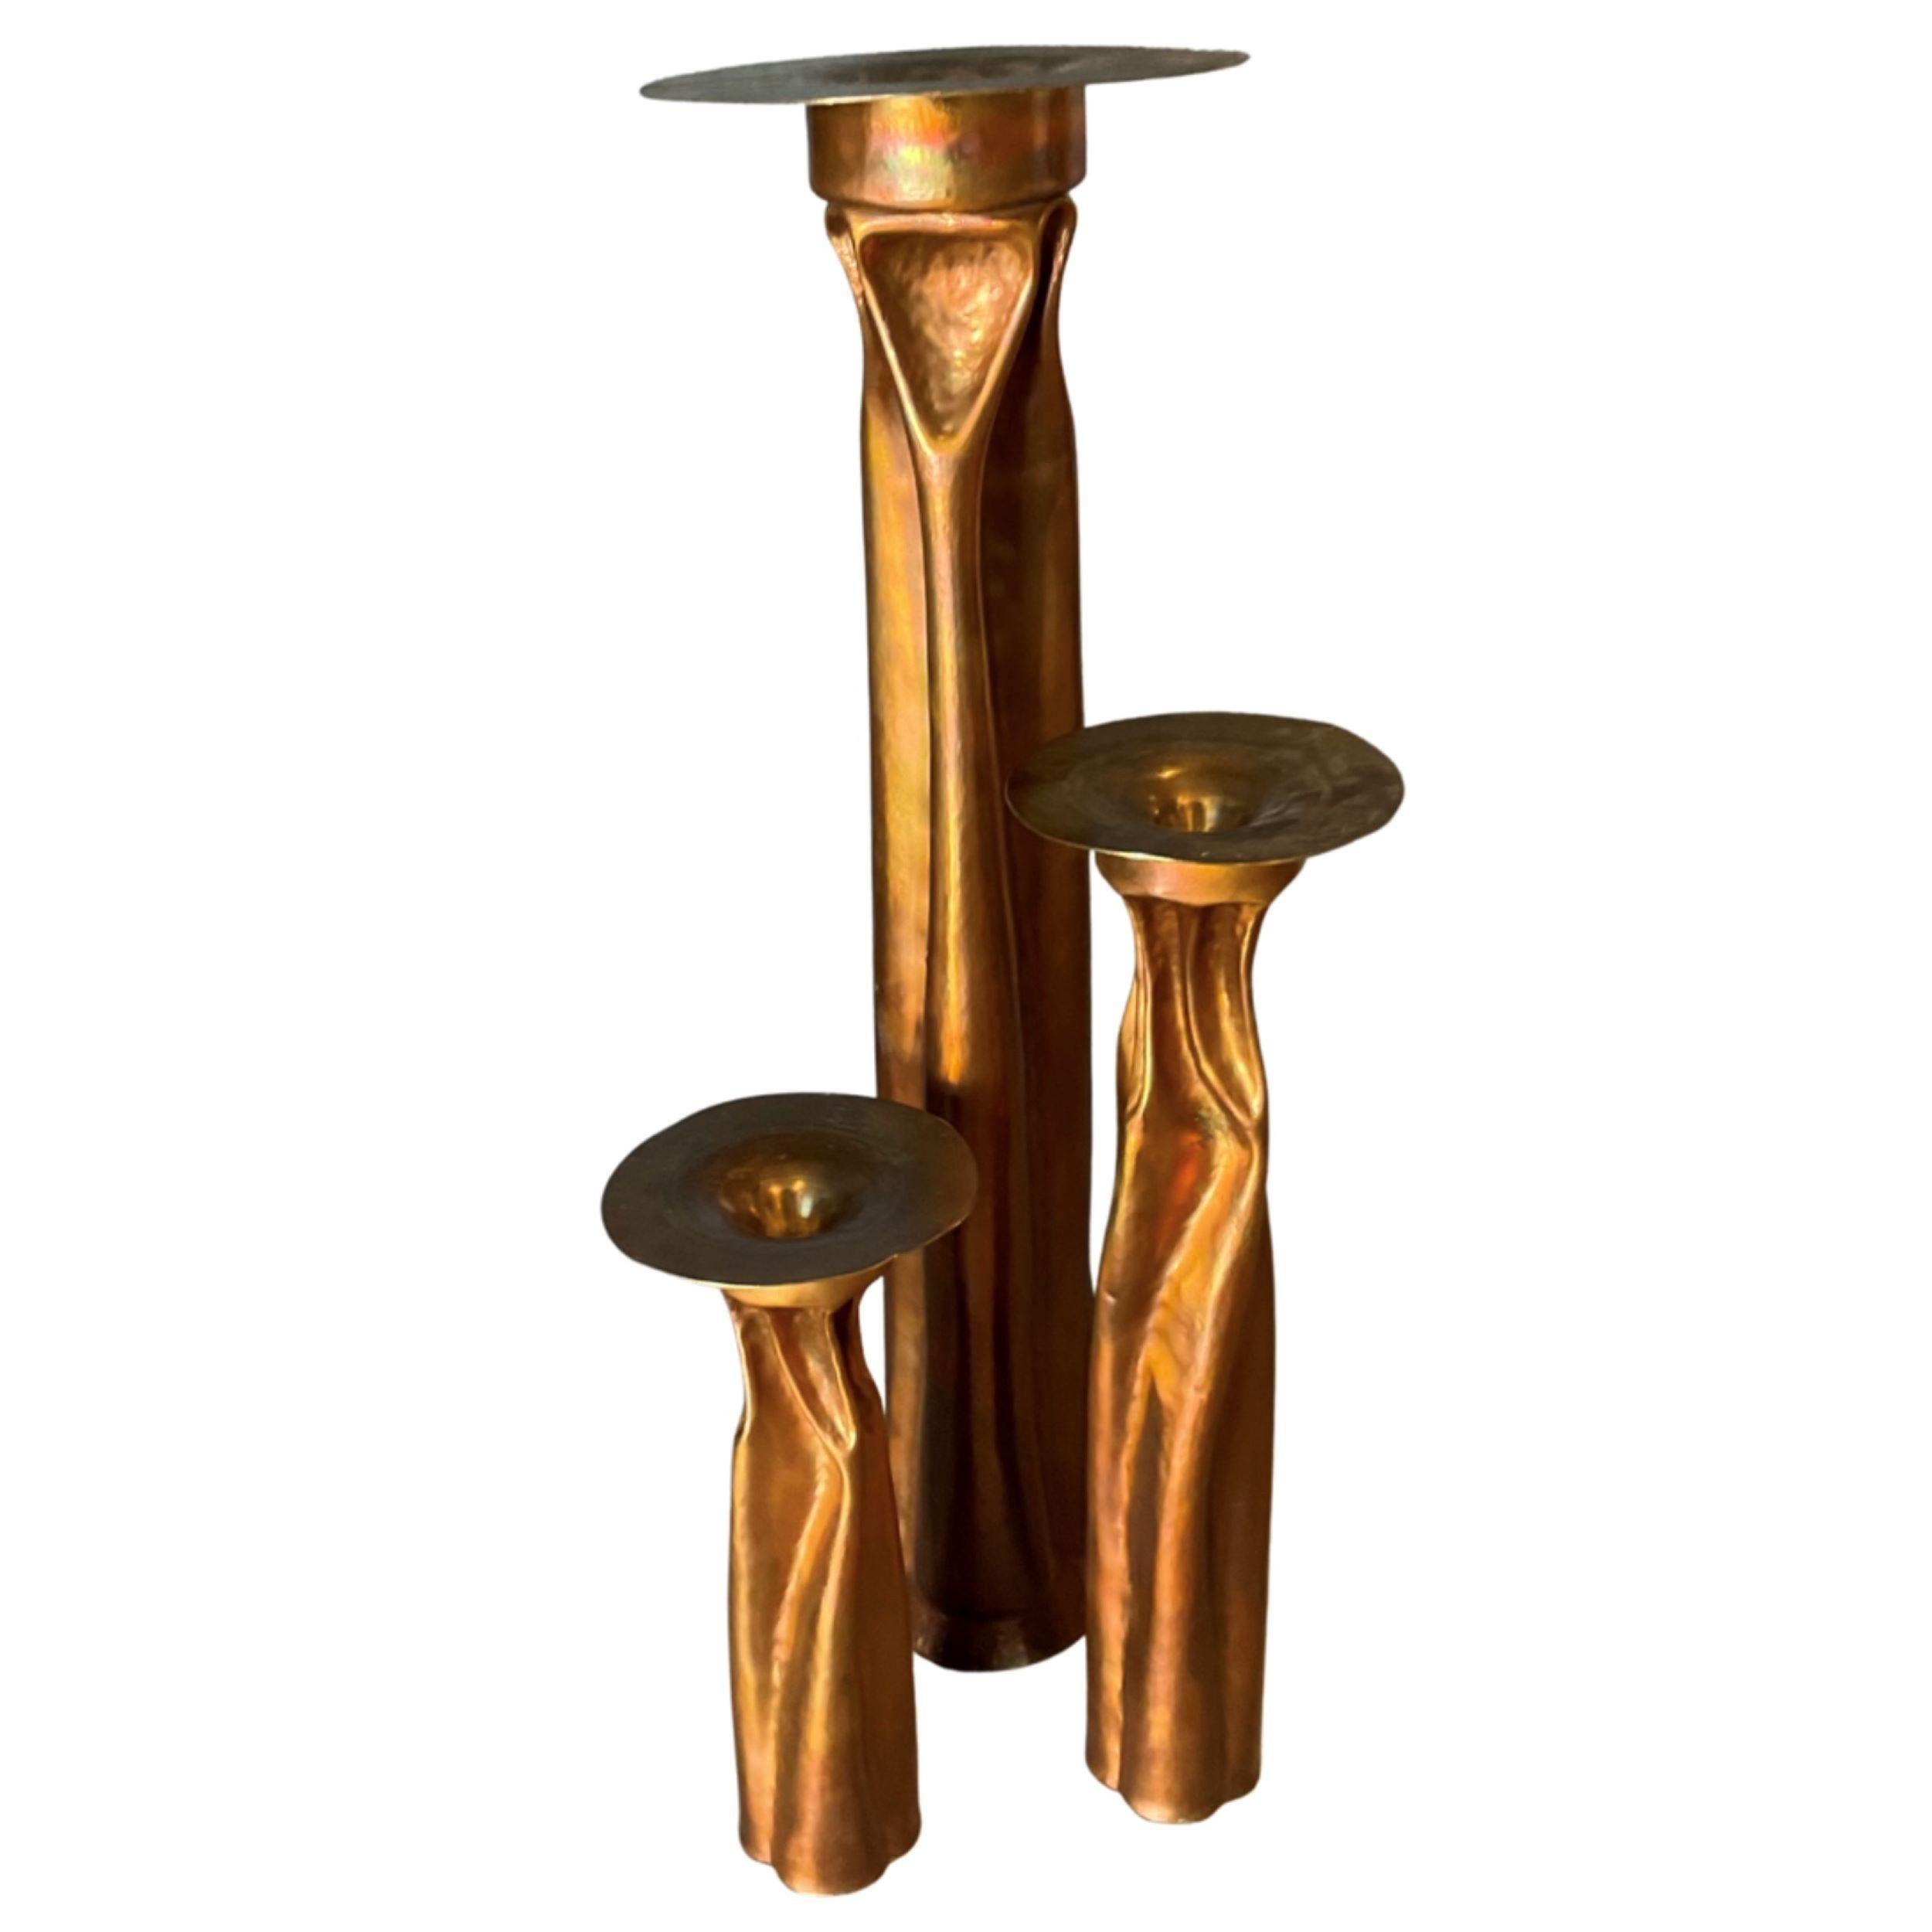 Thomas Roy Markusen (TRM).
1970's Abstract design copper candle holders.
Set of 3 in varying heights.
Hand-crafted & stamped 